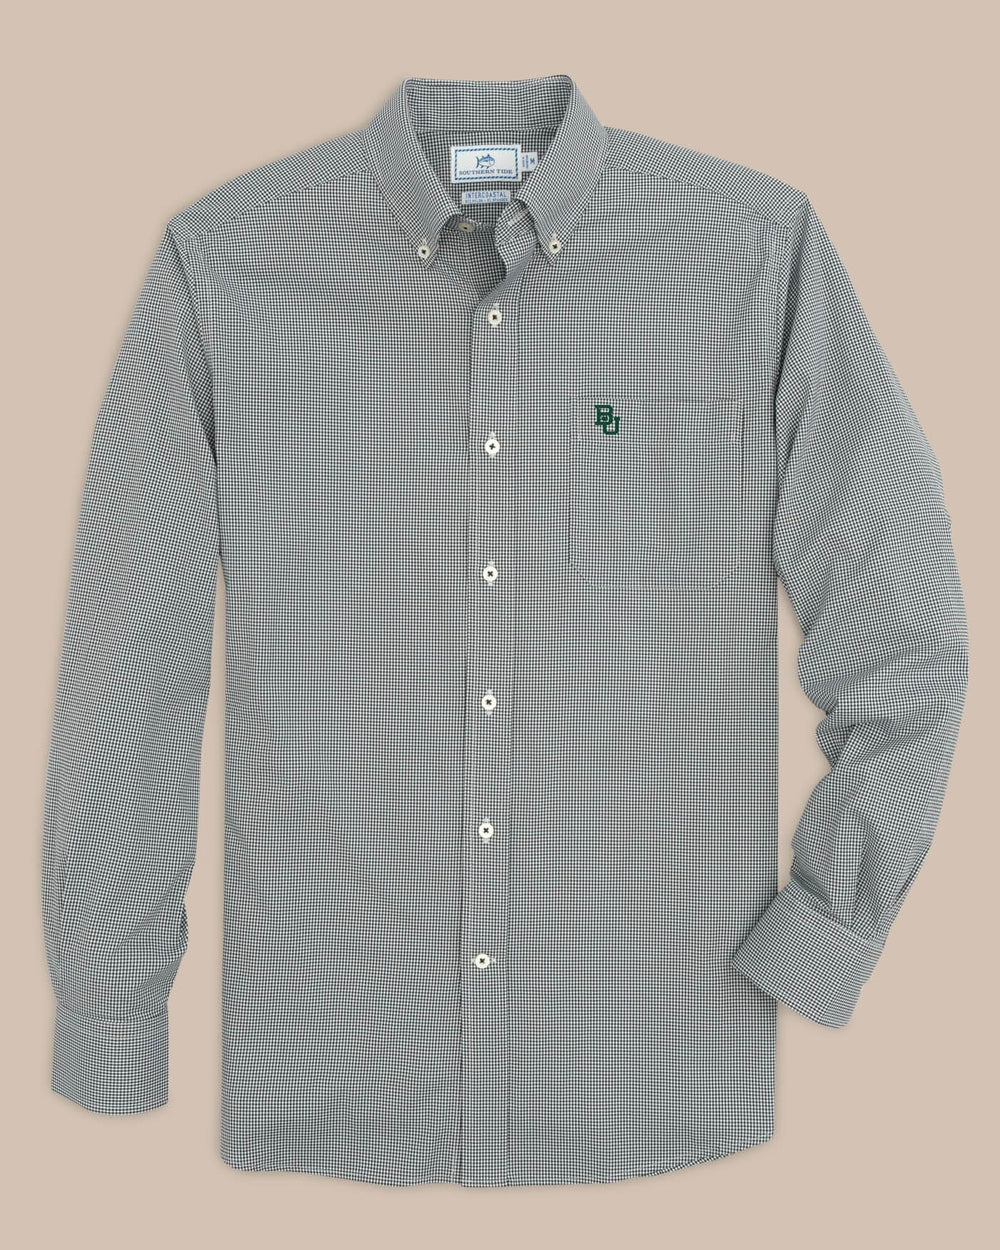 The front view of the Men's Black Baylor Gingham Button Down Shirt by Southern Tide - Black